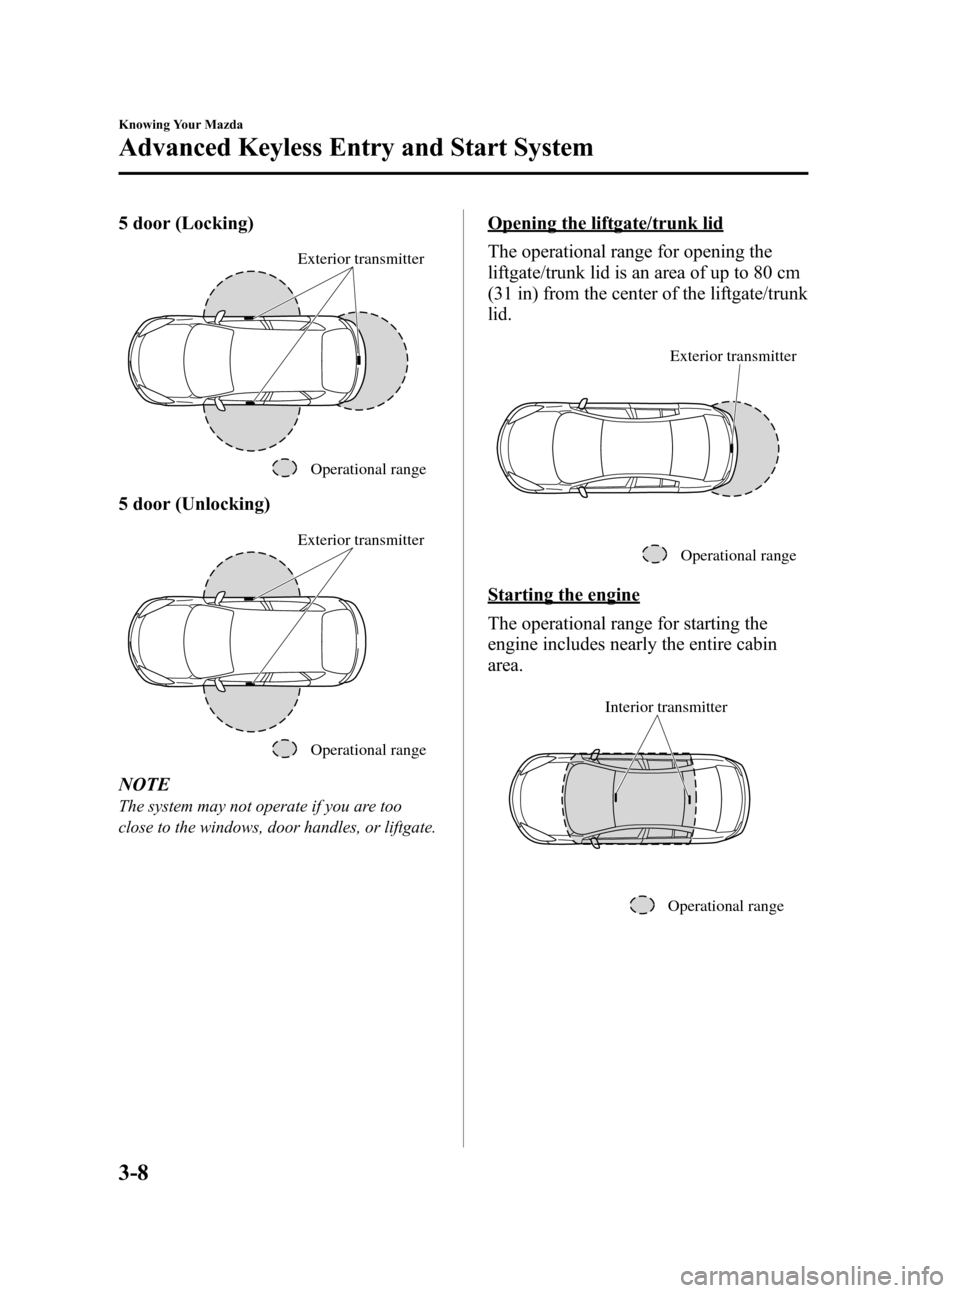 MAZDA MODEL 3 HATCHBACK 2011  Owners Manual (in English) Black plate (84,1)
5 door (Locking)
Operational range
Exterior transmitter
5 door (Unlocking)
Operational range
Exterior transmitter
NOTE
The system may not operate if you are too
close to the windows